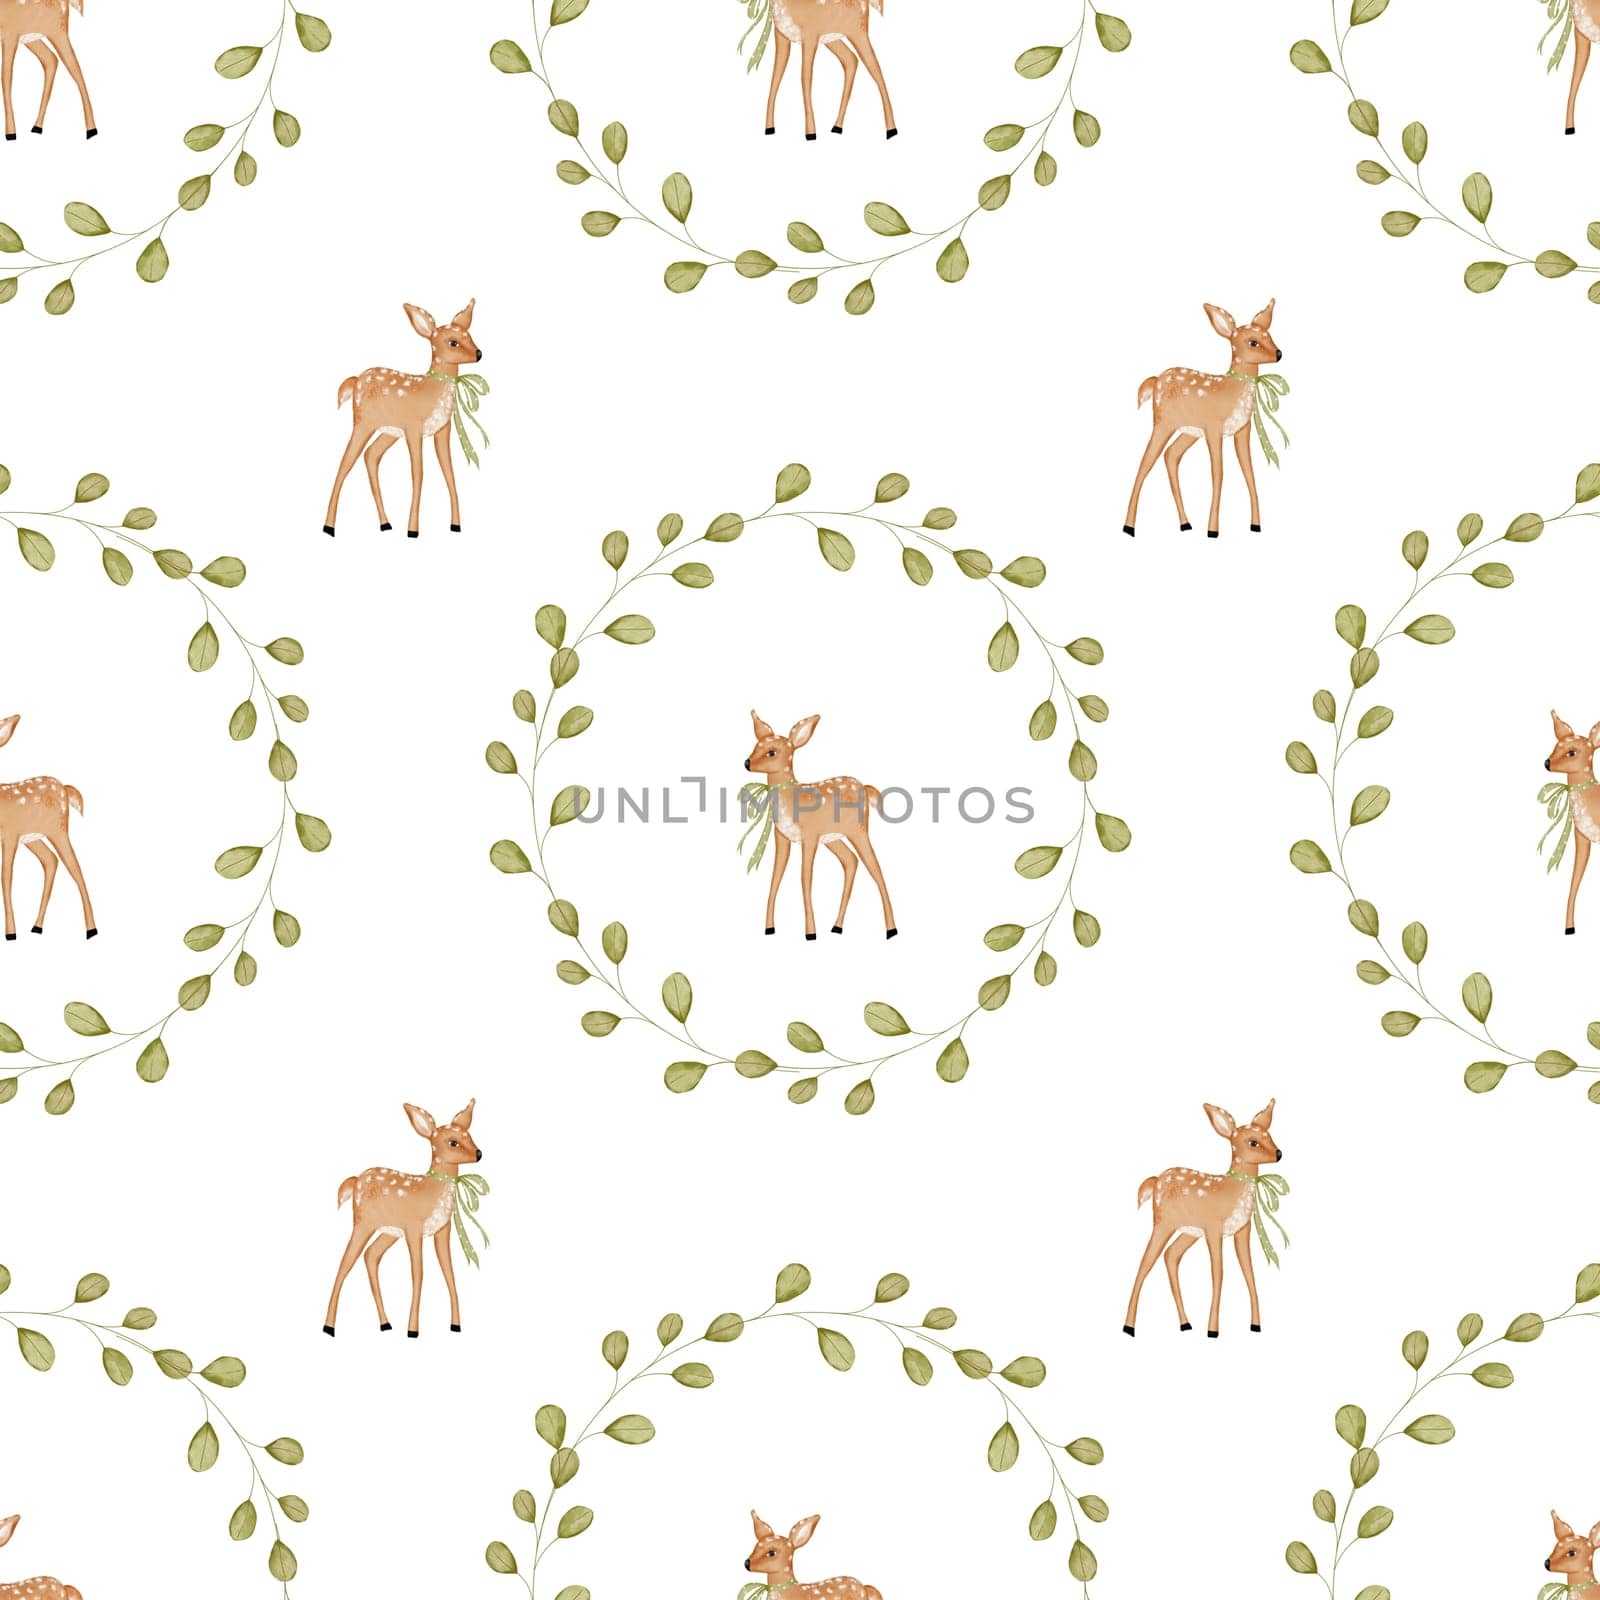 Watercolor seamless baby pattern fawn and branch wreath. Elegant cute animal pattern with bow in round frame. For printing on children's textiles and bedding